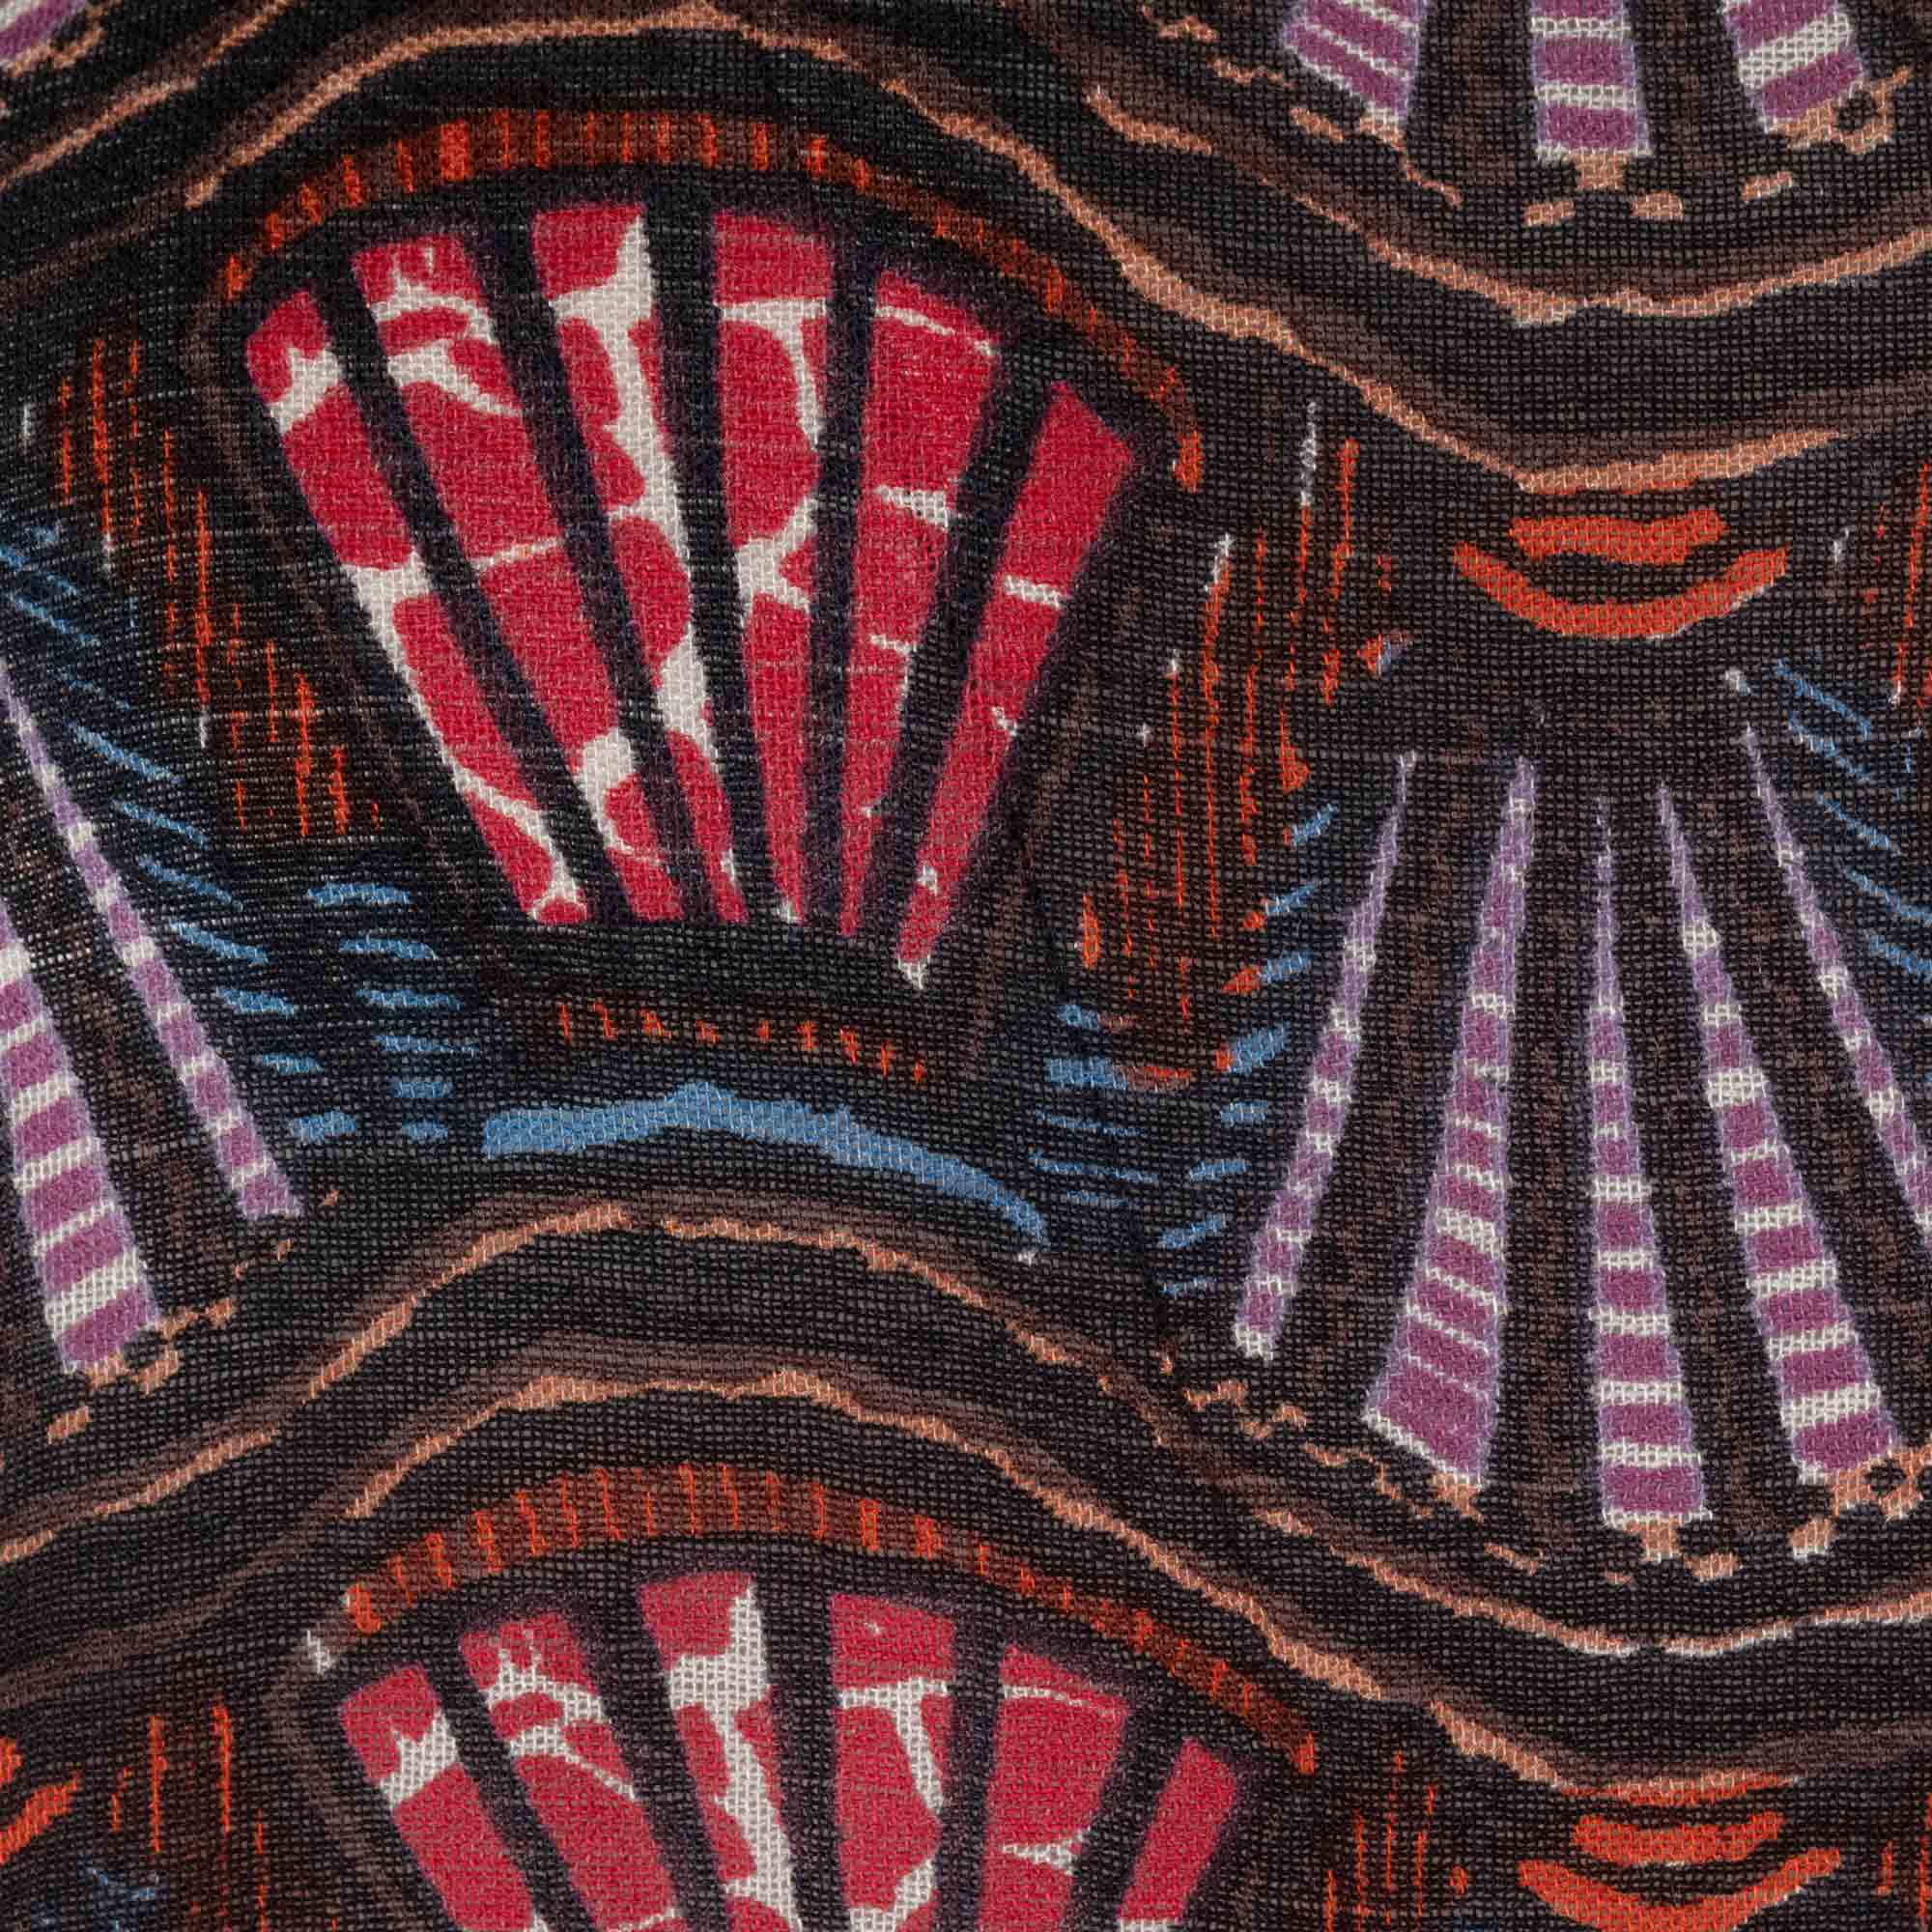 A close up image of the pattern reveals the detail and qaulity of the intricate print